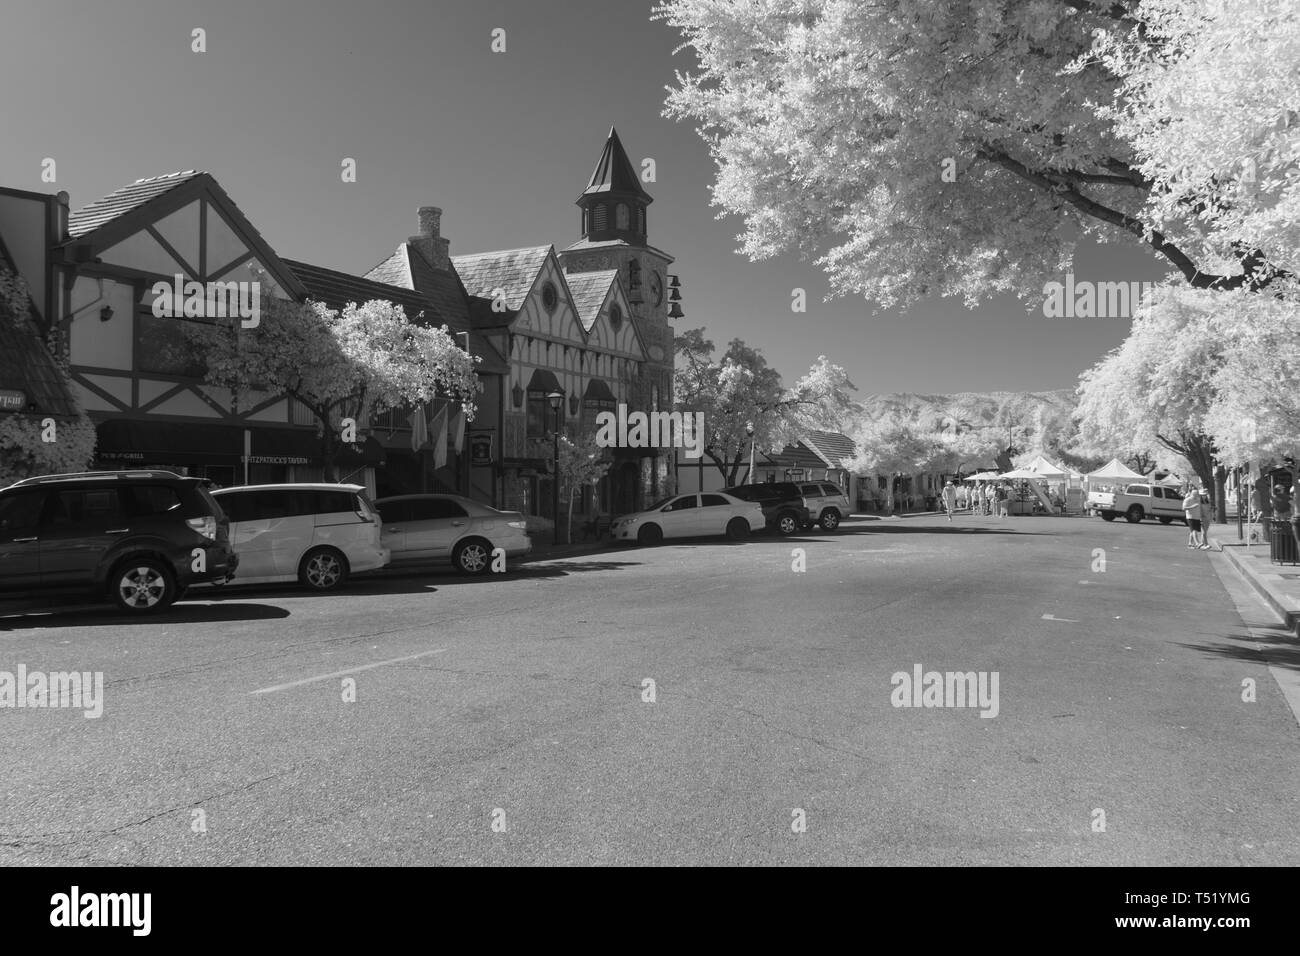 City street with tourists, parked cars and Danish architecture. Frosty looking trees, black and white. Stock Photo